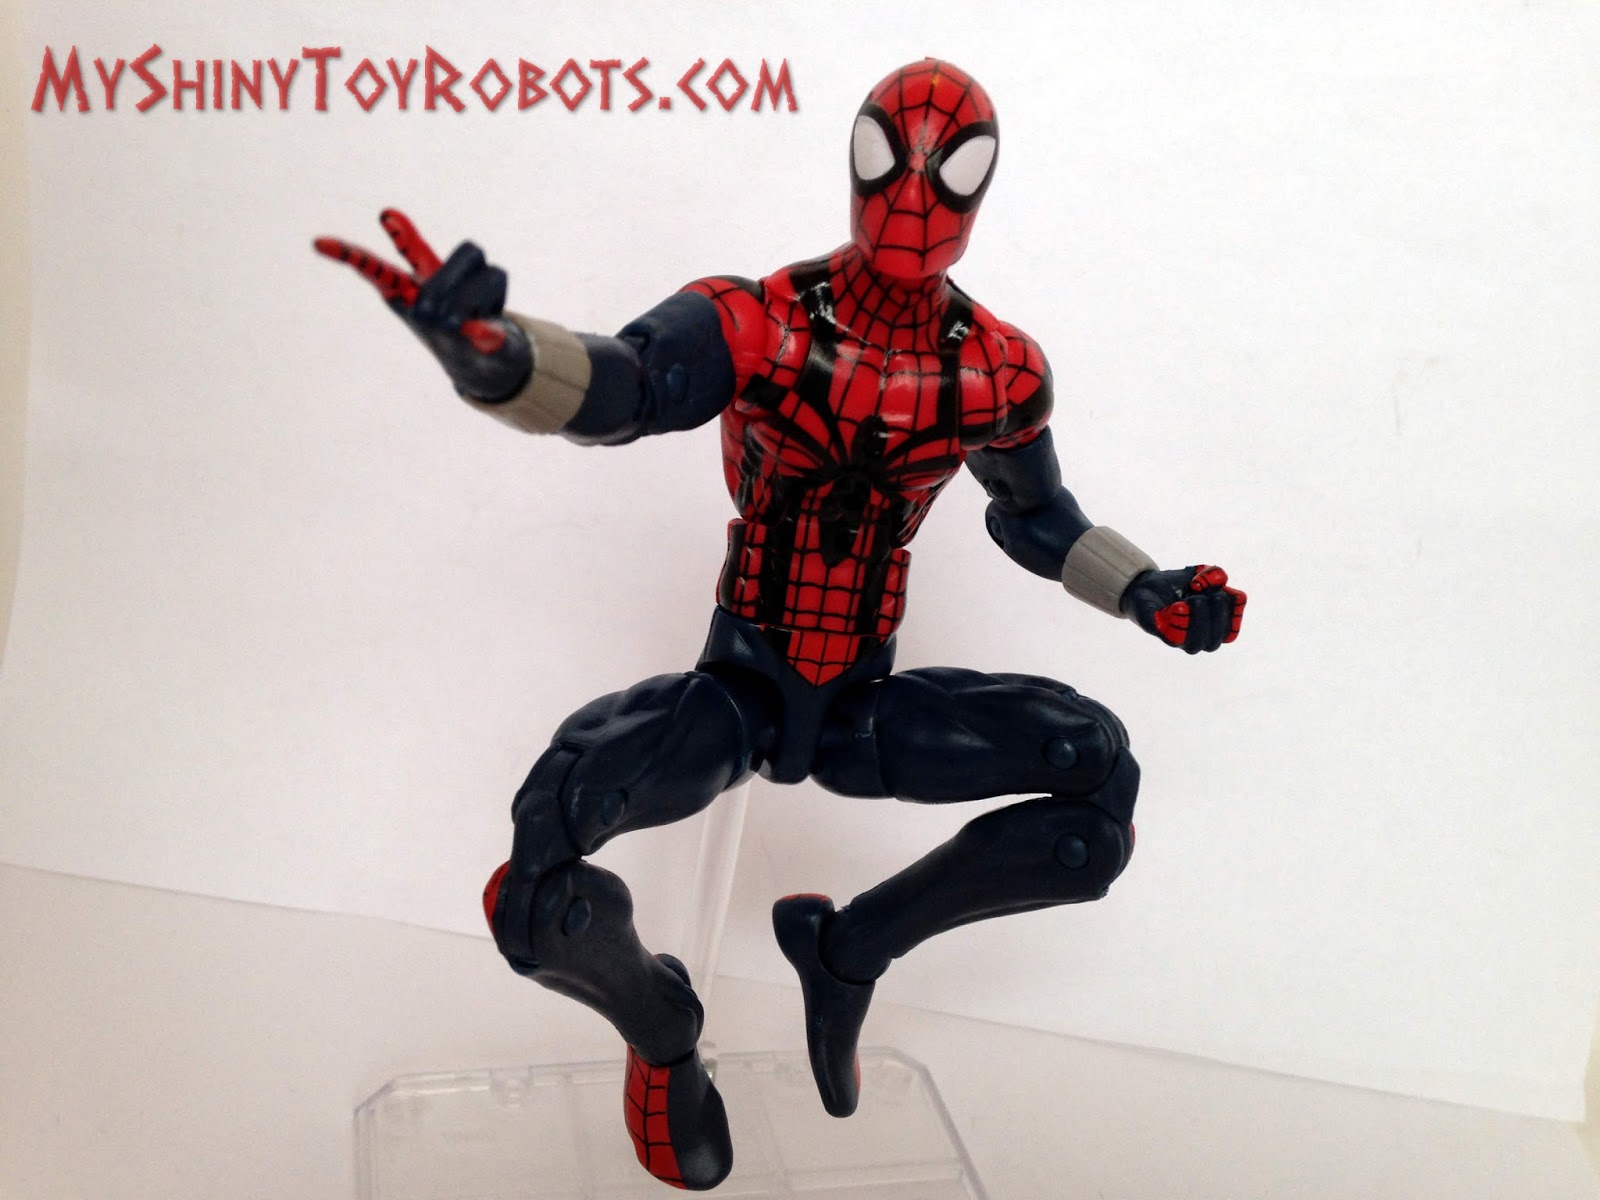 My Shiny Toy Robots: Toybox REVIEW: Marvel Legends Spider-Man (Ben 